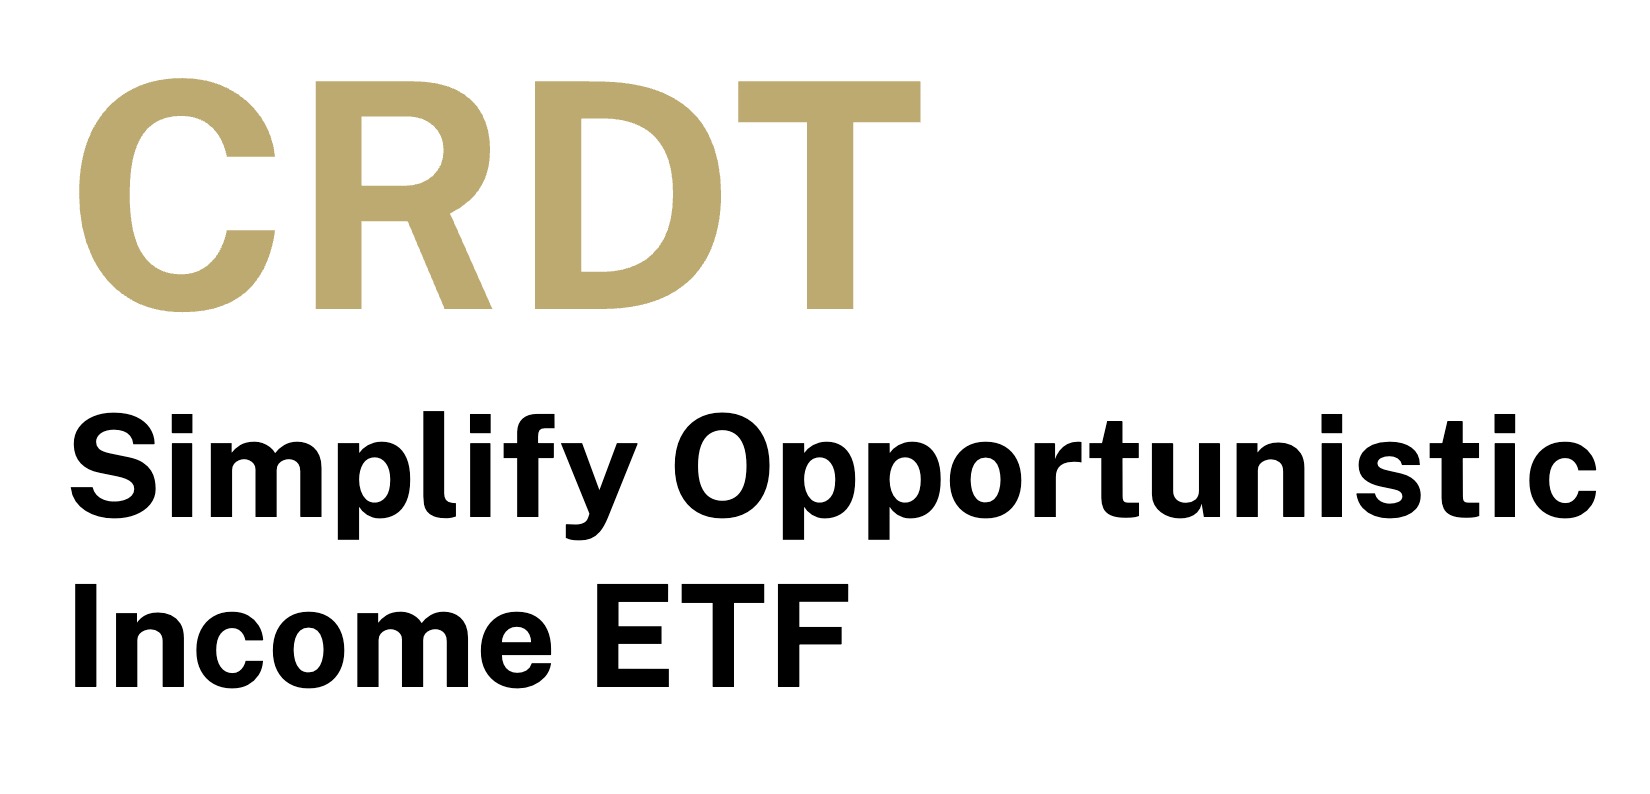 CRDT Simplify Opportunistic Income ETF 